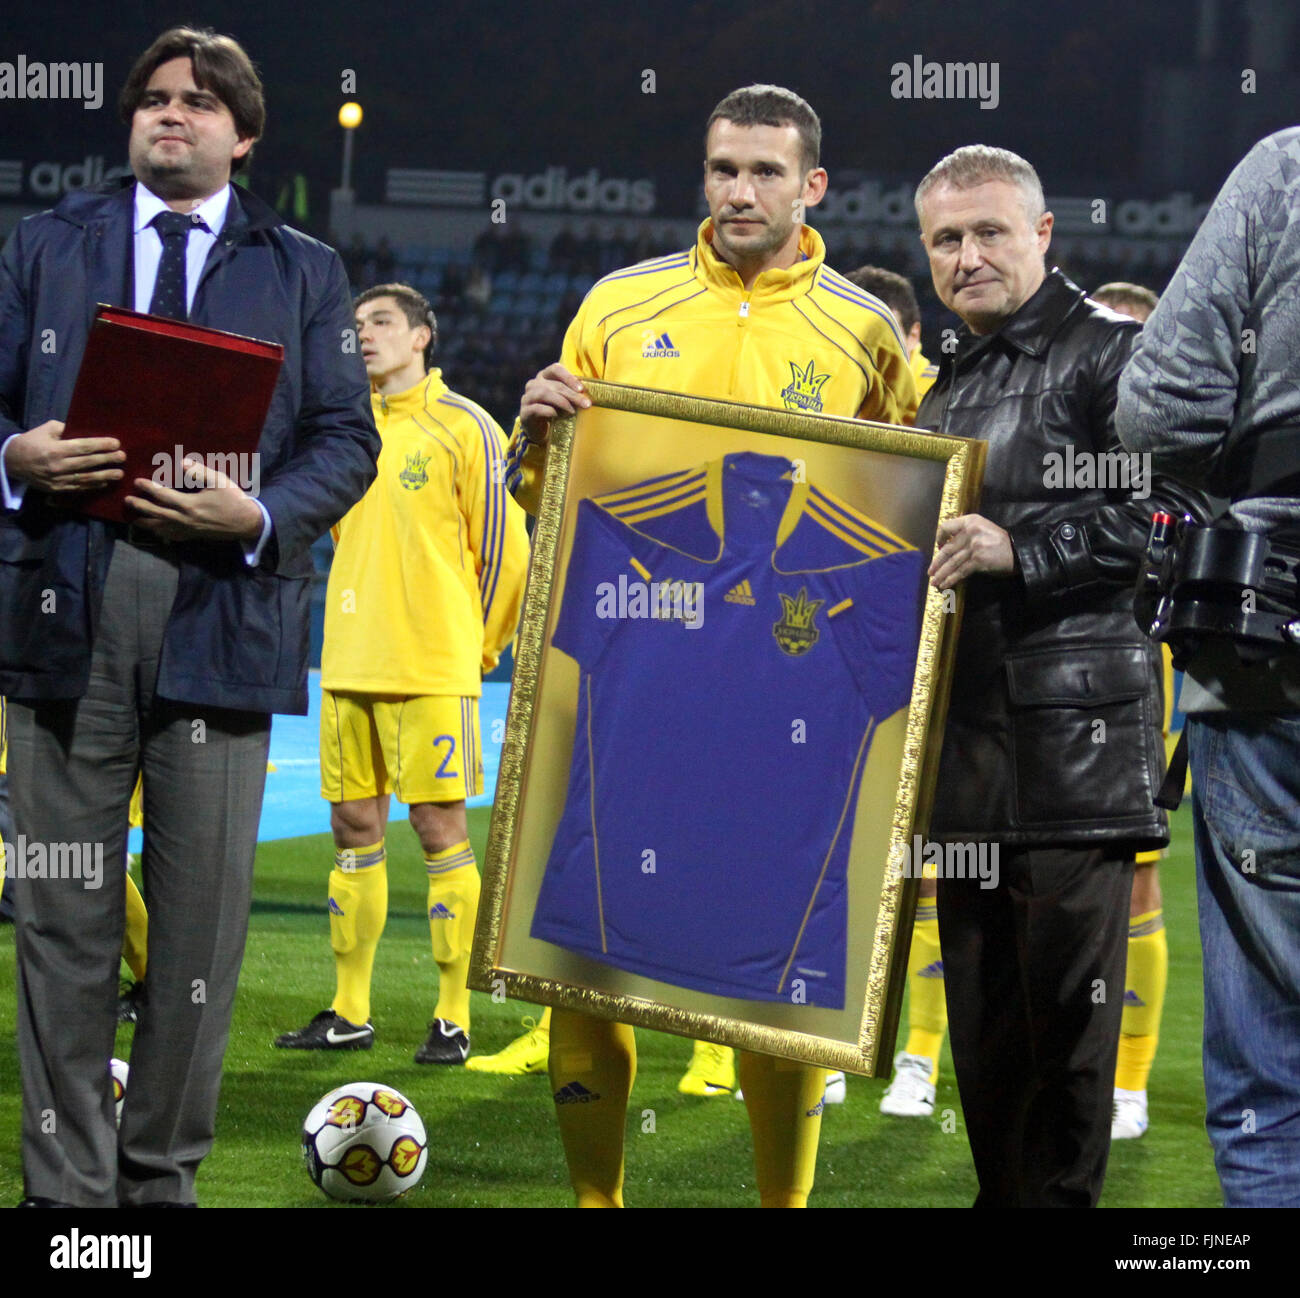 KYIV, UKRAINE - OCTOBER 8, 2010: Andriy Shevchenko of Ukraine (C) awarding for making his 100th appearance with Ukraine’s national team before friendly game against Canada on October 8, 2010 in Kyiv, Ukraine Stock Photo